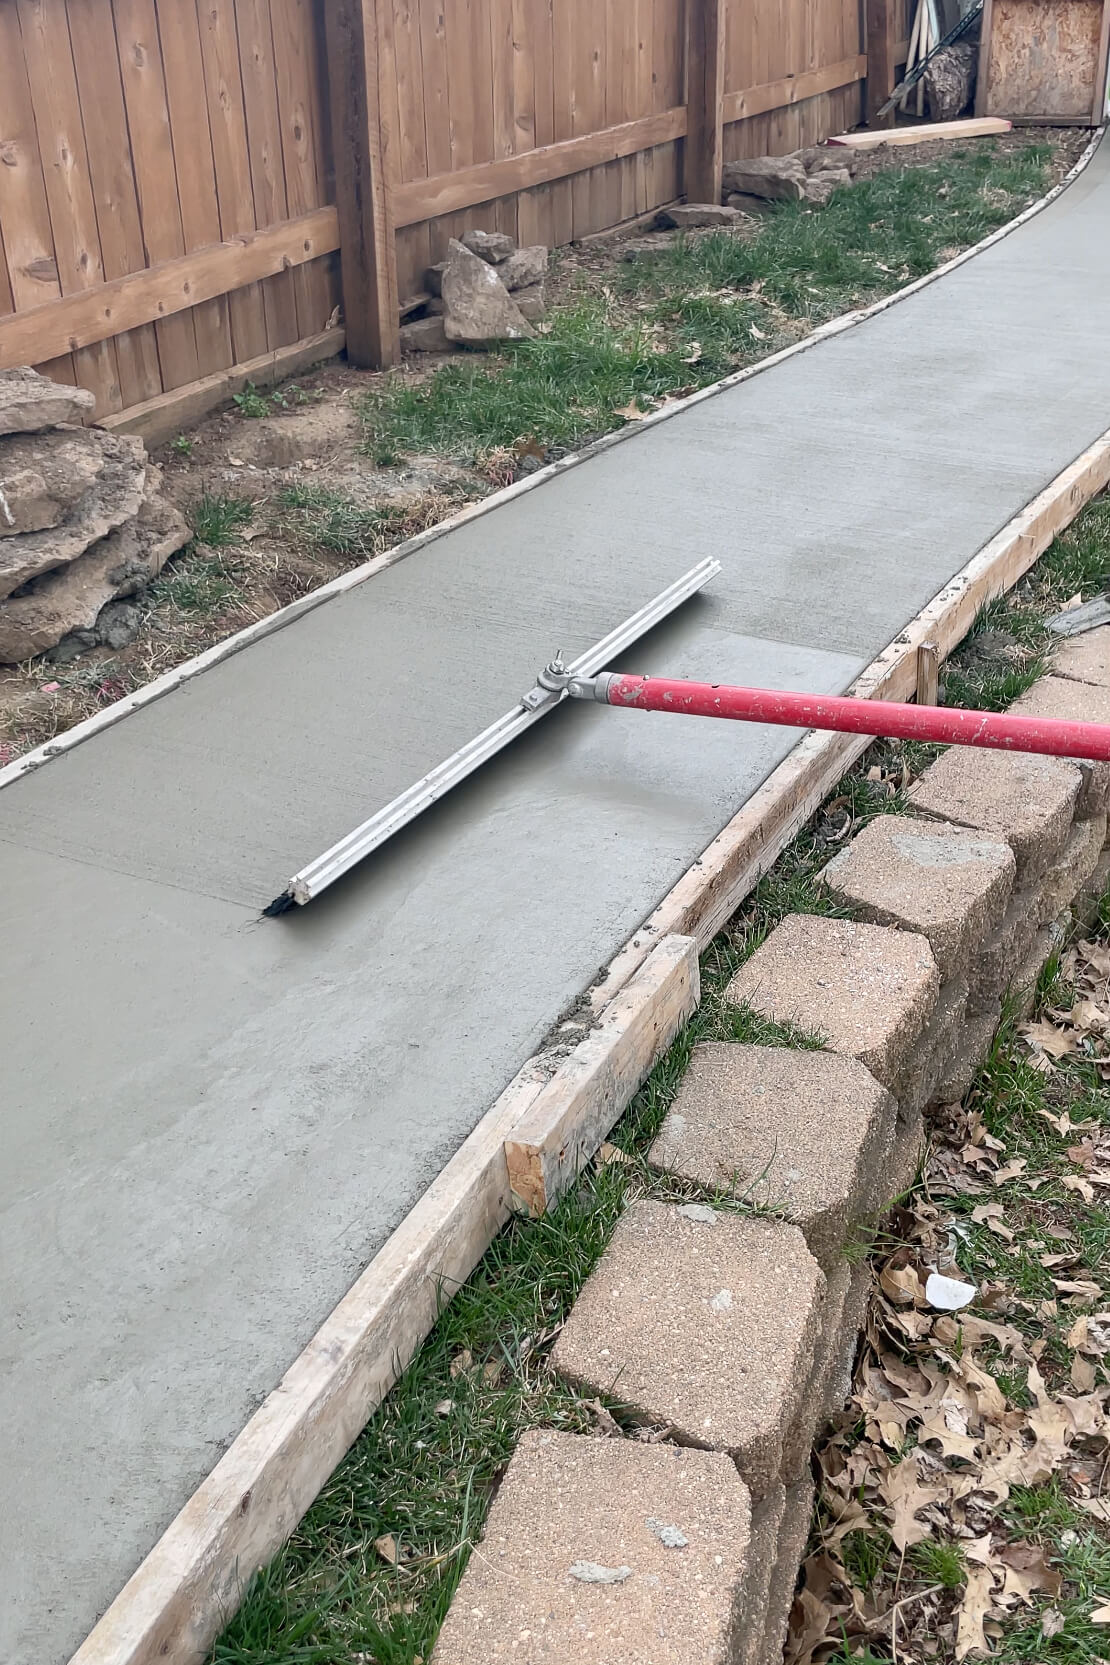 Brushing the freshly poured concrete.